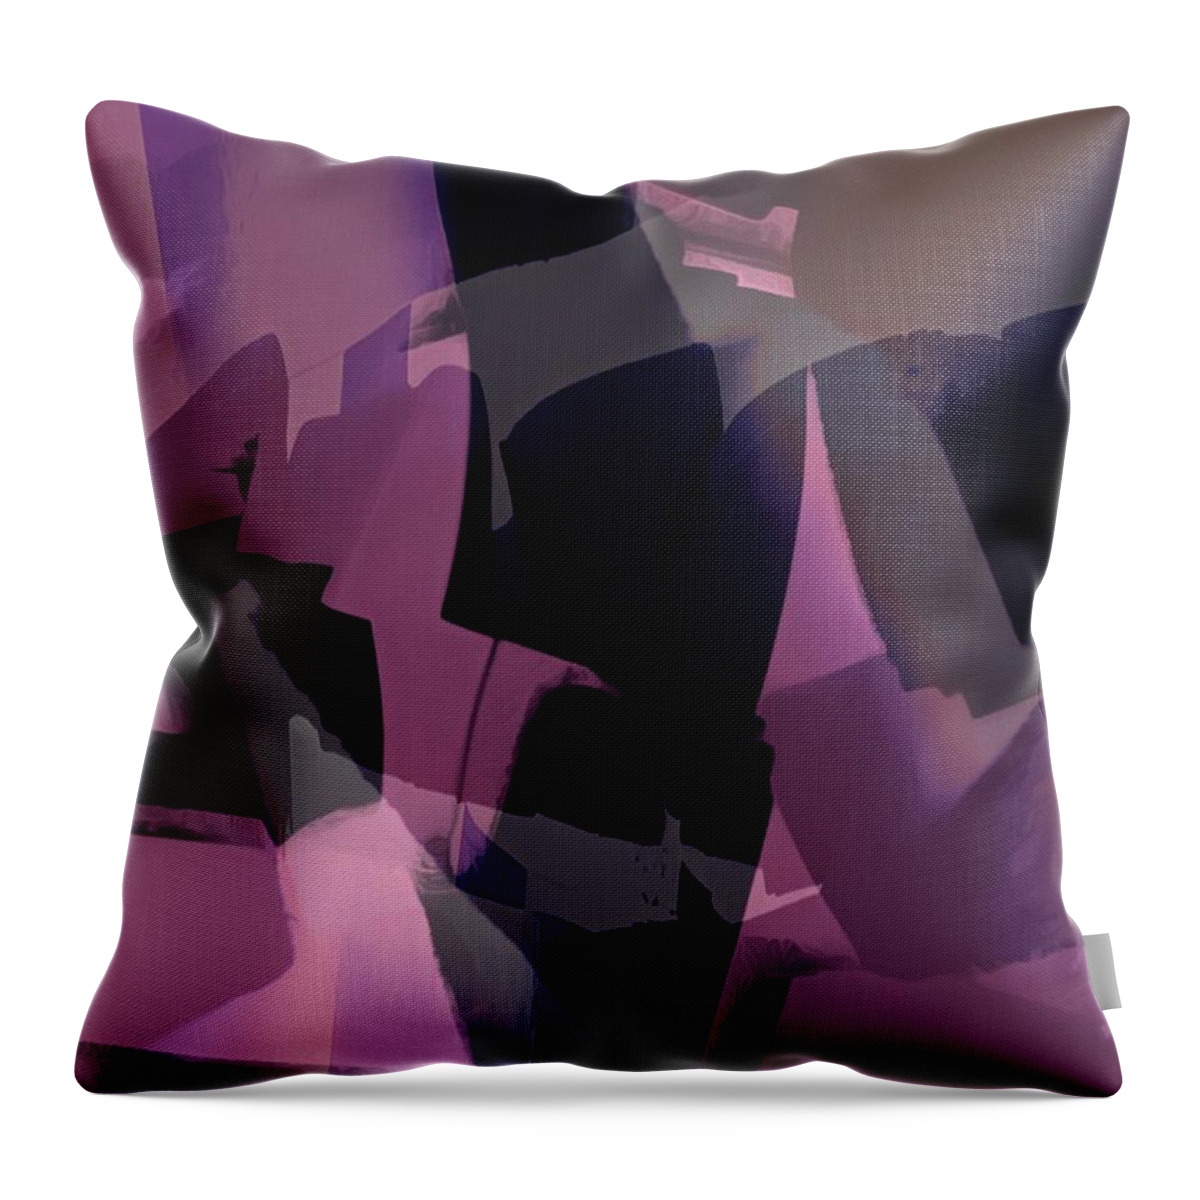  Throw Pillow featuring the digital art Abstract #1 by Michelle Hoffmann